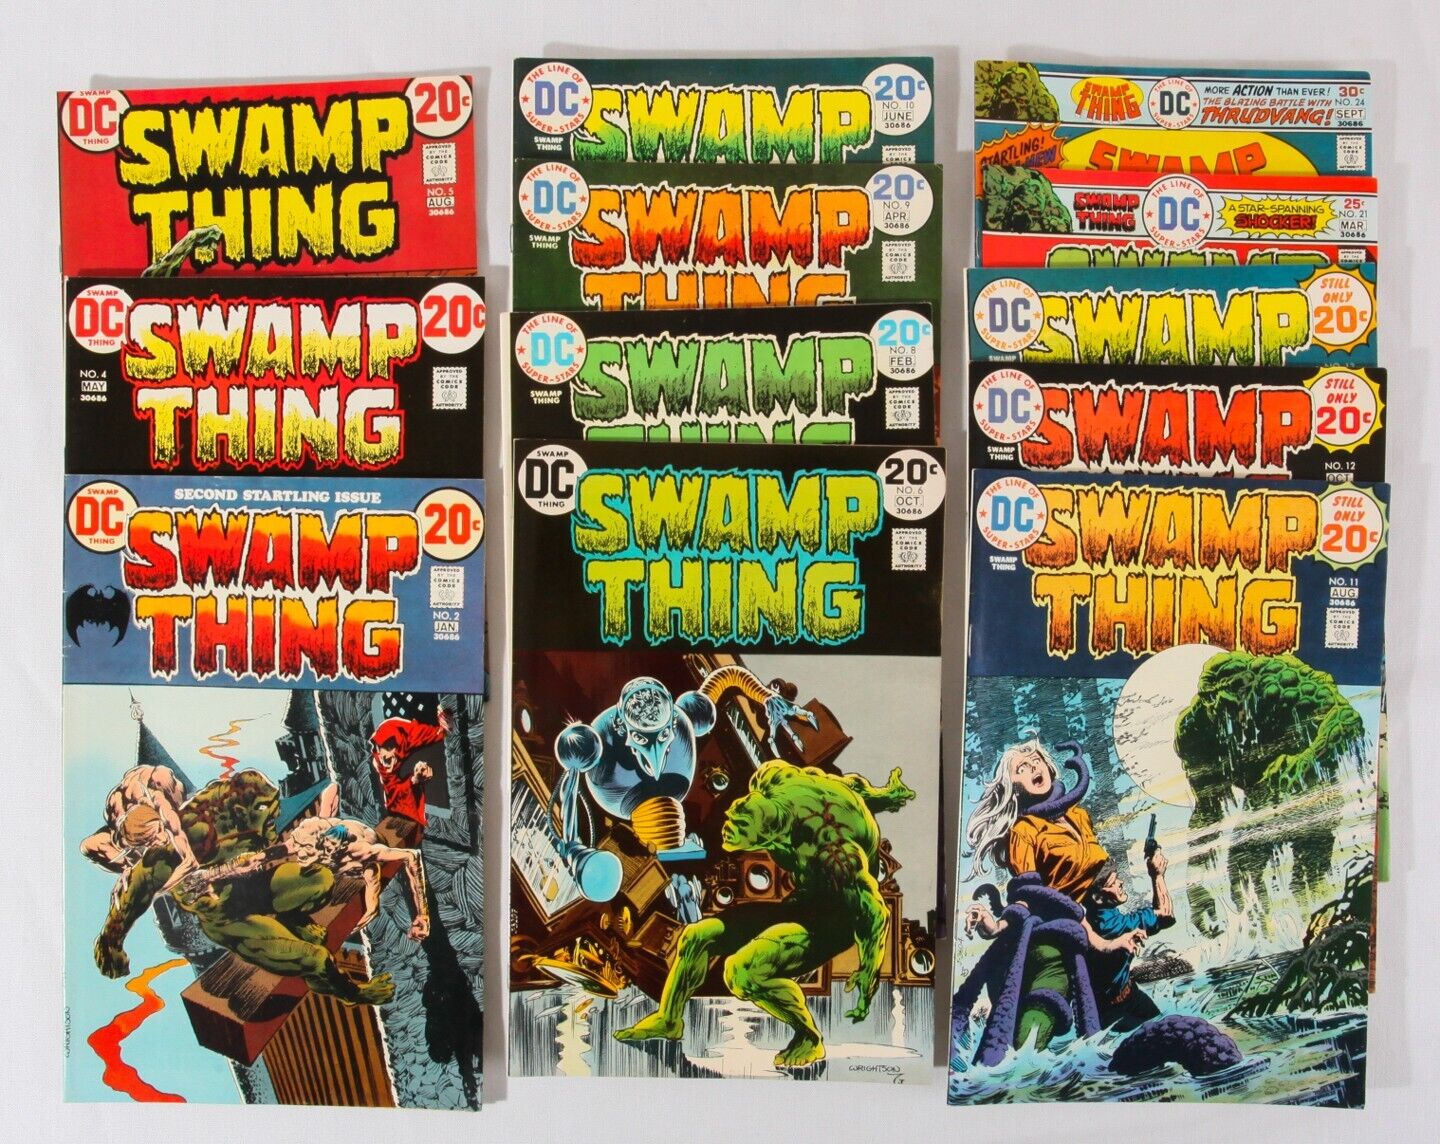 Swamp Thing #2 4 5 6 8 9 10 11 12 13 21 24, Lot of 12, All 8.0 VF to 9.0 VF/NM